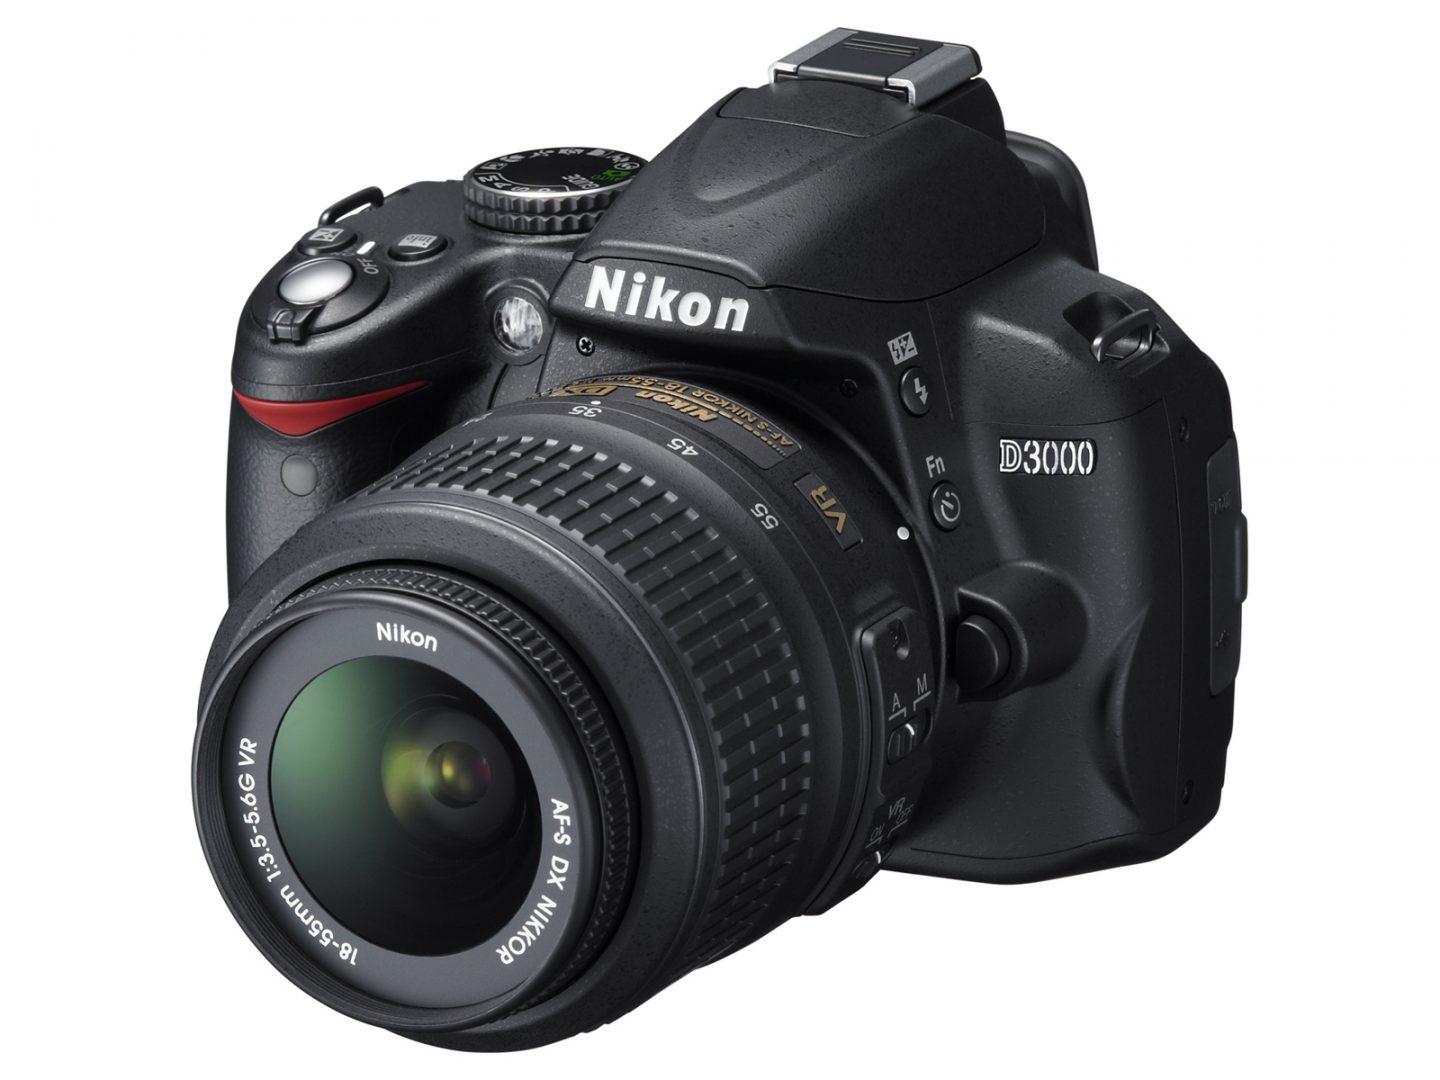 The+Nikon+D3000%2C+a+10.2-megapixel+DSLR%2C+is+the+perfect+entry-level+camera+for+those+who+want+something+more+powerful+than+a+simple+point-and-shoot.+%28Nikon%2FMCT%29